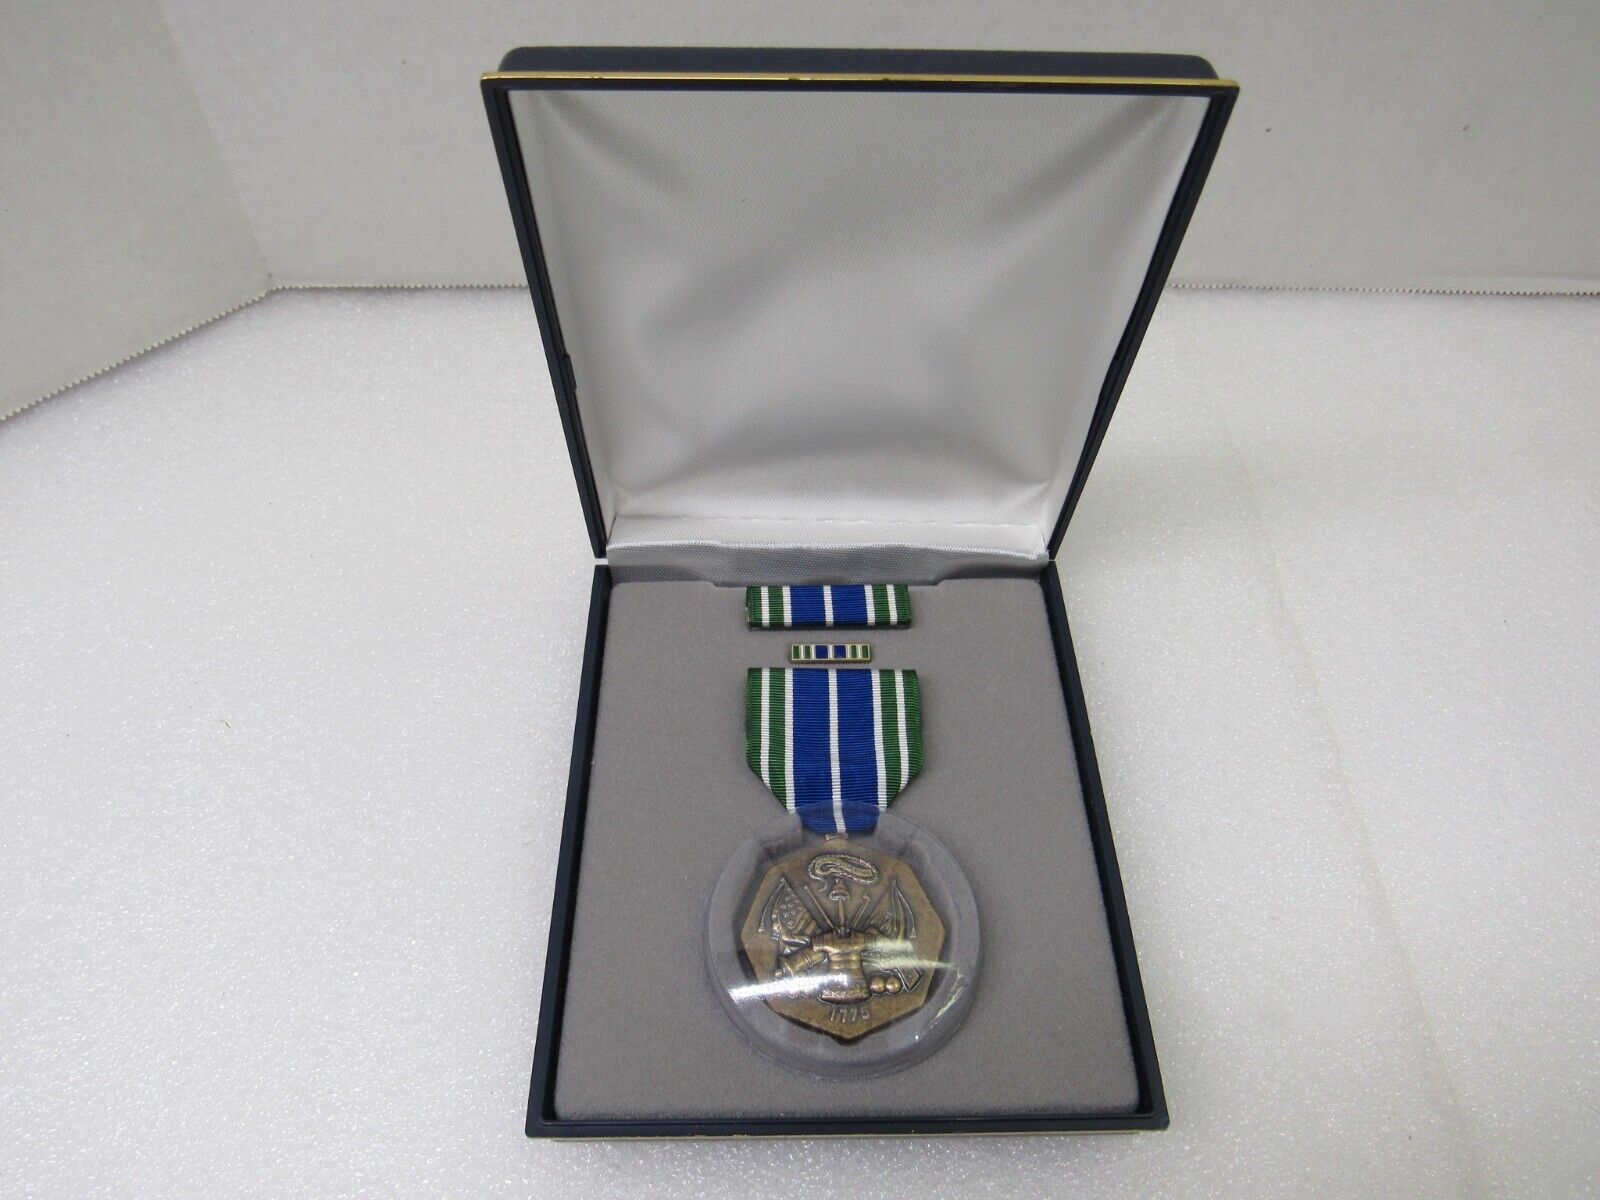 US Army Medal For Military Achievement Box Set Full Size Medal Ribbon Lapel Pin